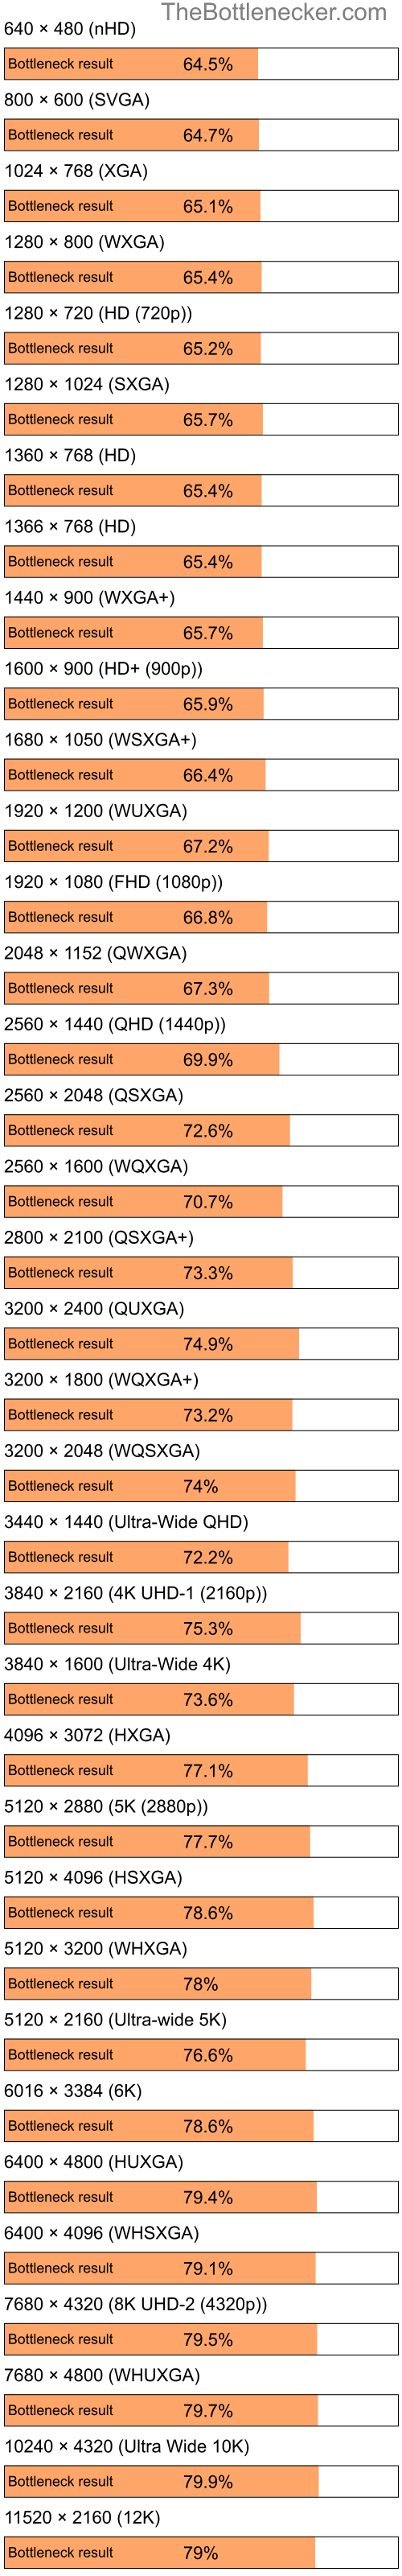 Bottleneck results by resolution for Intel Celeron M 410 and NVIDIA Quadro NVS 295 in General Tasks